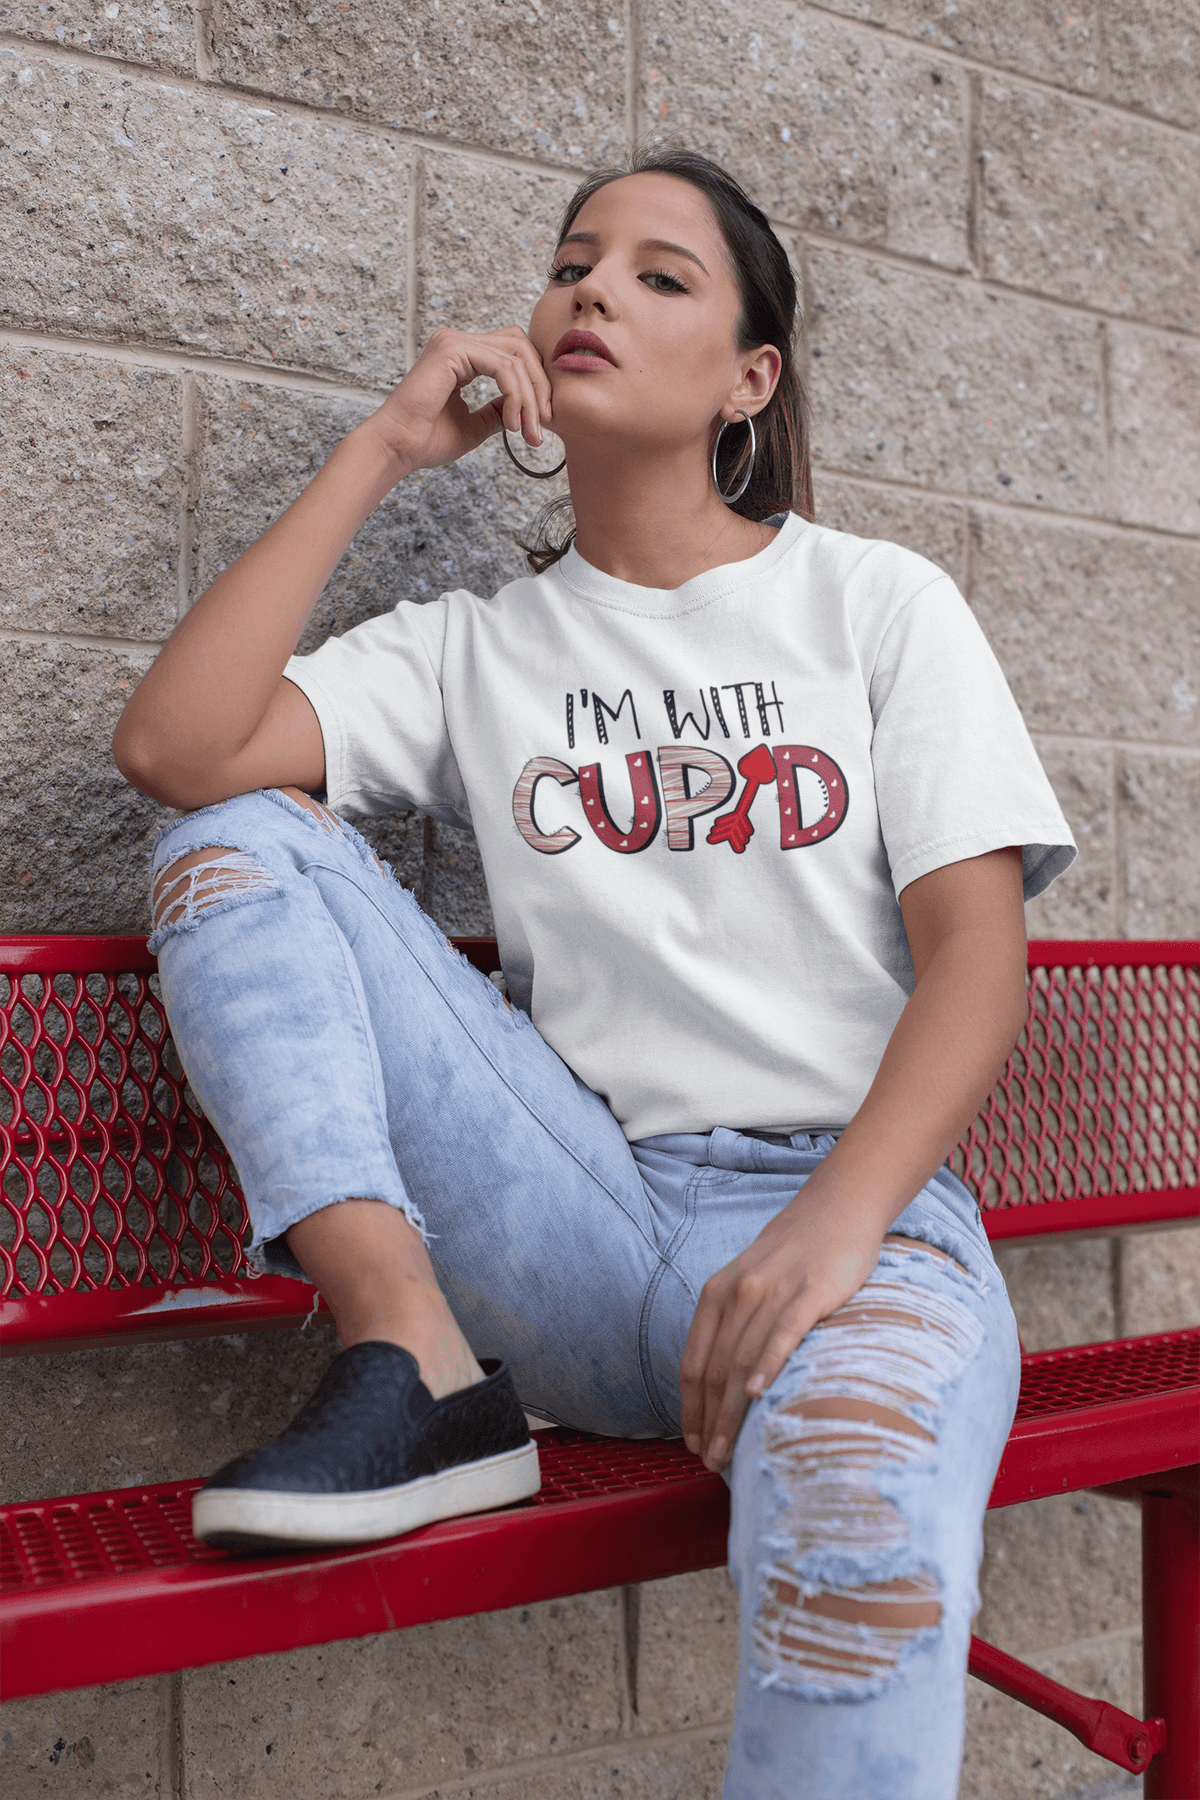 I'M WITH CUPID T-shirt-Regular Fit Tee-StylinArts